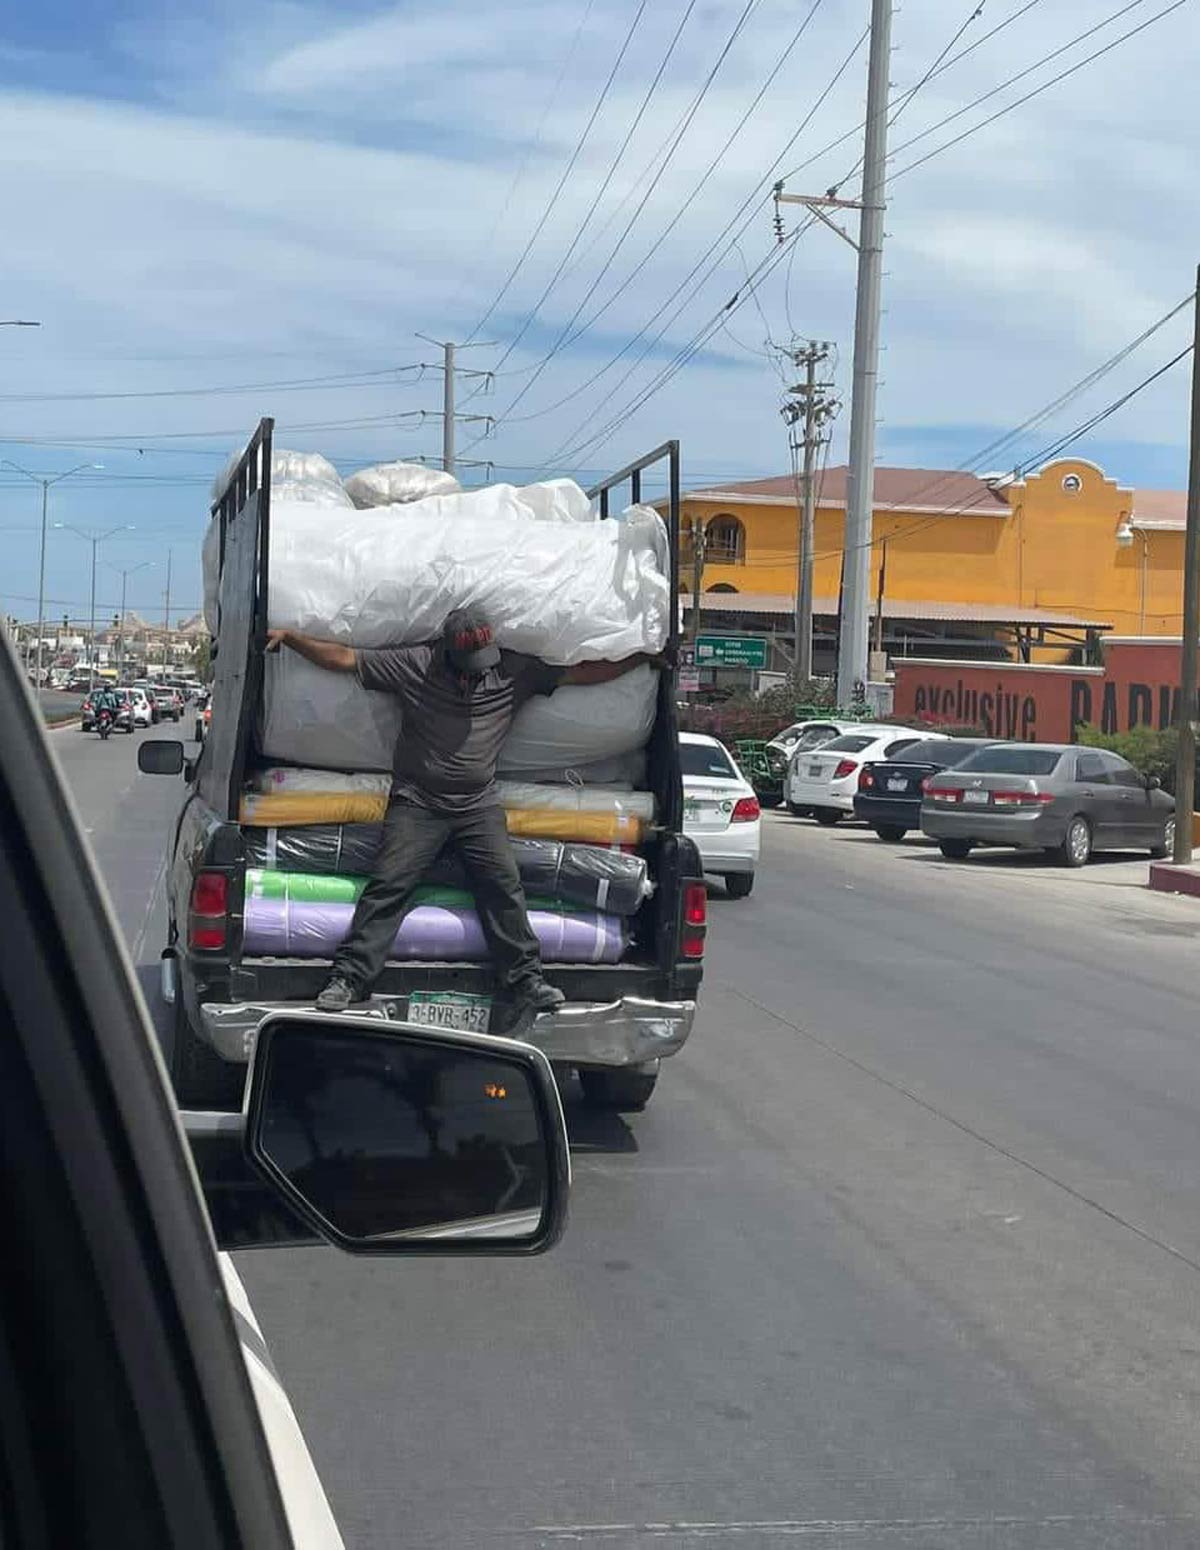 Spider-Man spotted in Mexico